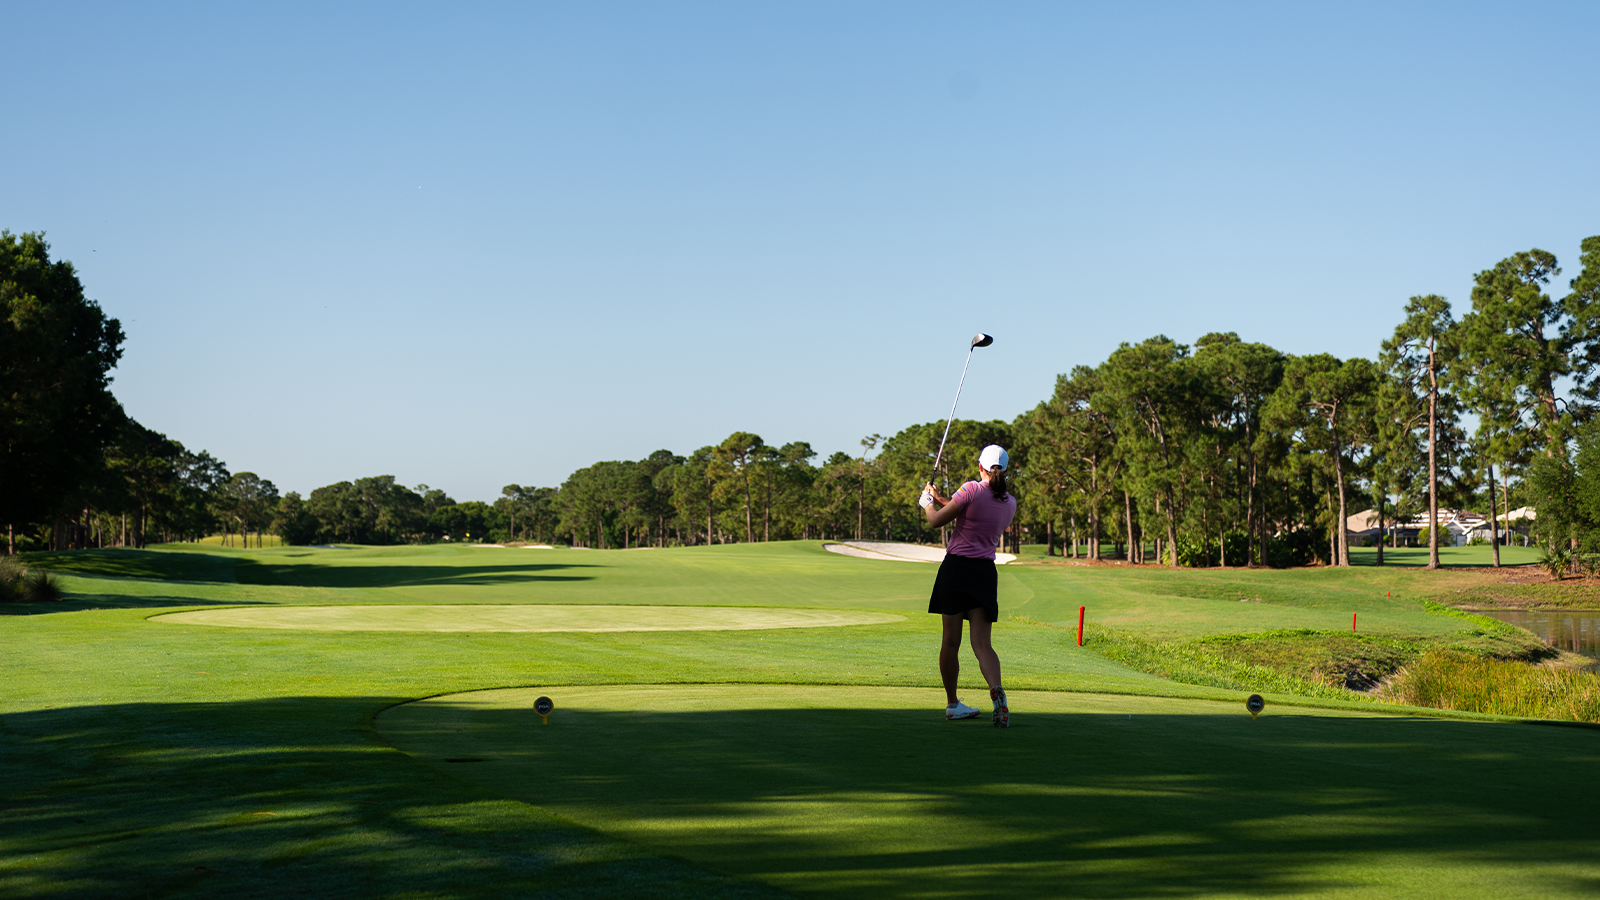 Joanna Coe hits her tee shot on the Ryder Course during the second round for the 54th PGA Professional Championship held at PGA Golf Club on April 26, 2021 in Port St. Lucie, Florida. (Photo by Montana Pritchard/PGA of America)